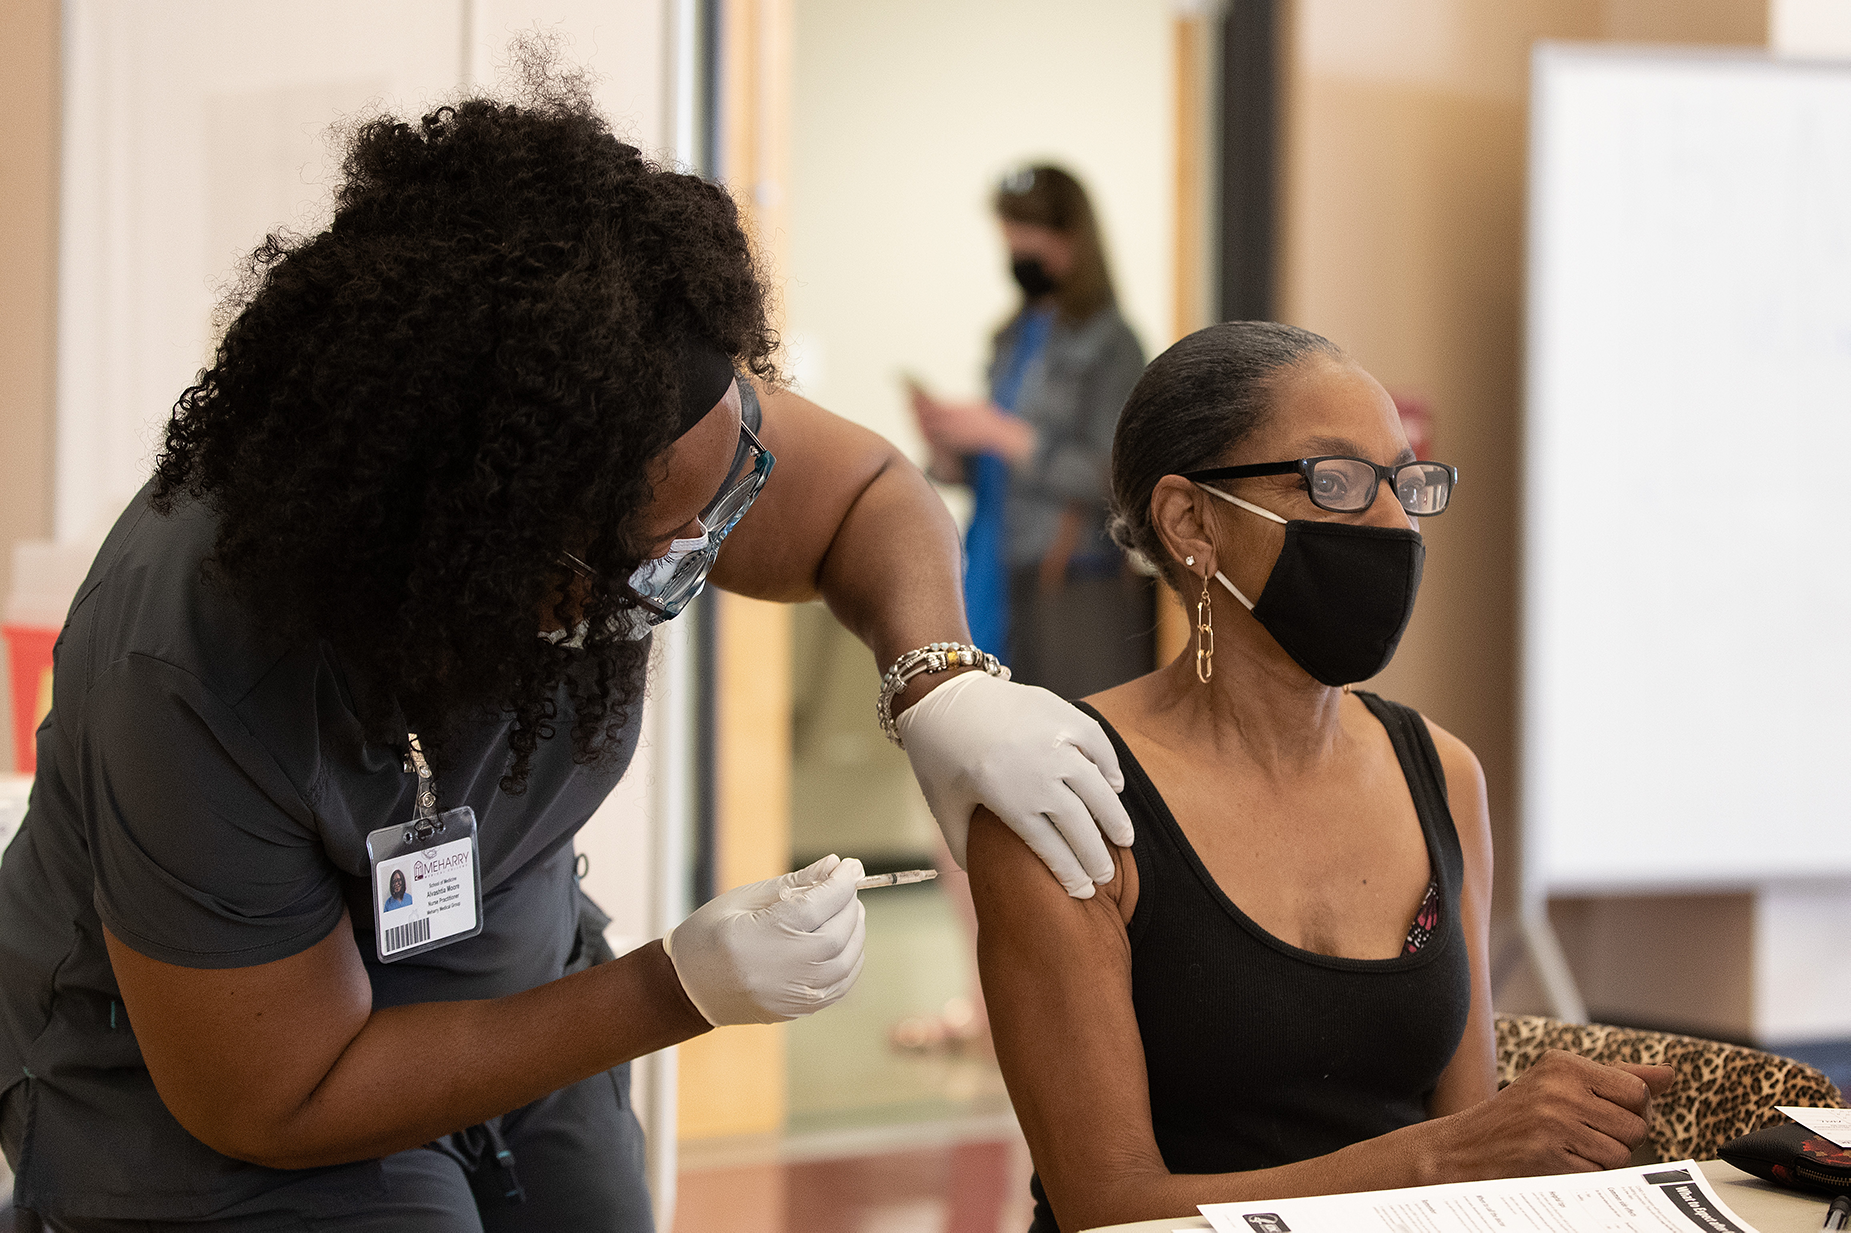 Joyce Holland receives a COVID-19 vaccination from Tia Moore, nurse practitioner, at Meharry Medical College in Nashville, Tenn. Photo by Mike DuBose UM News.